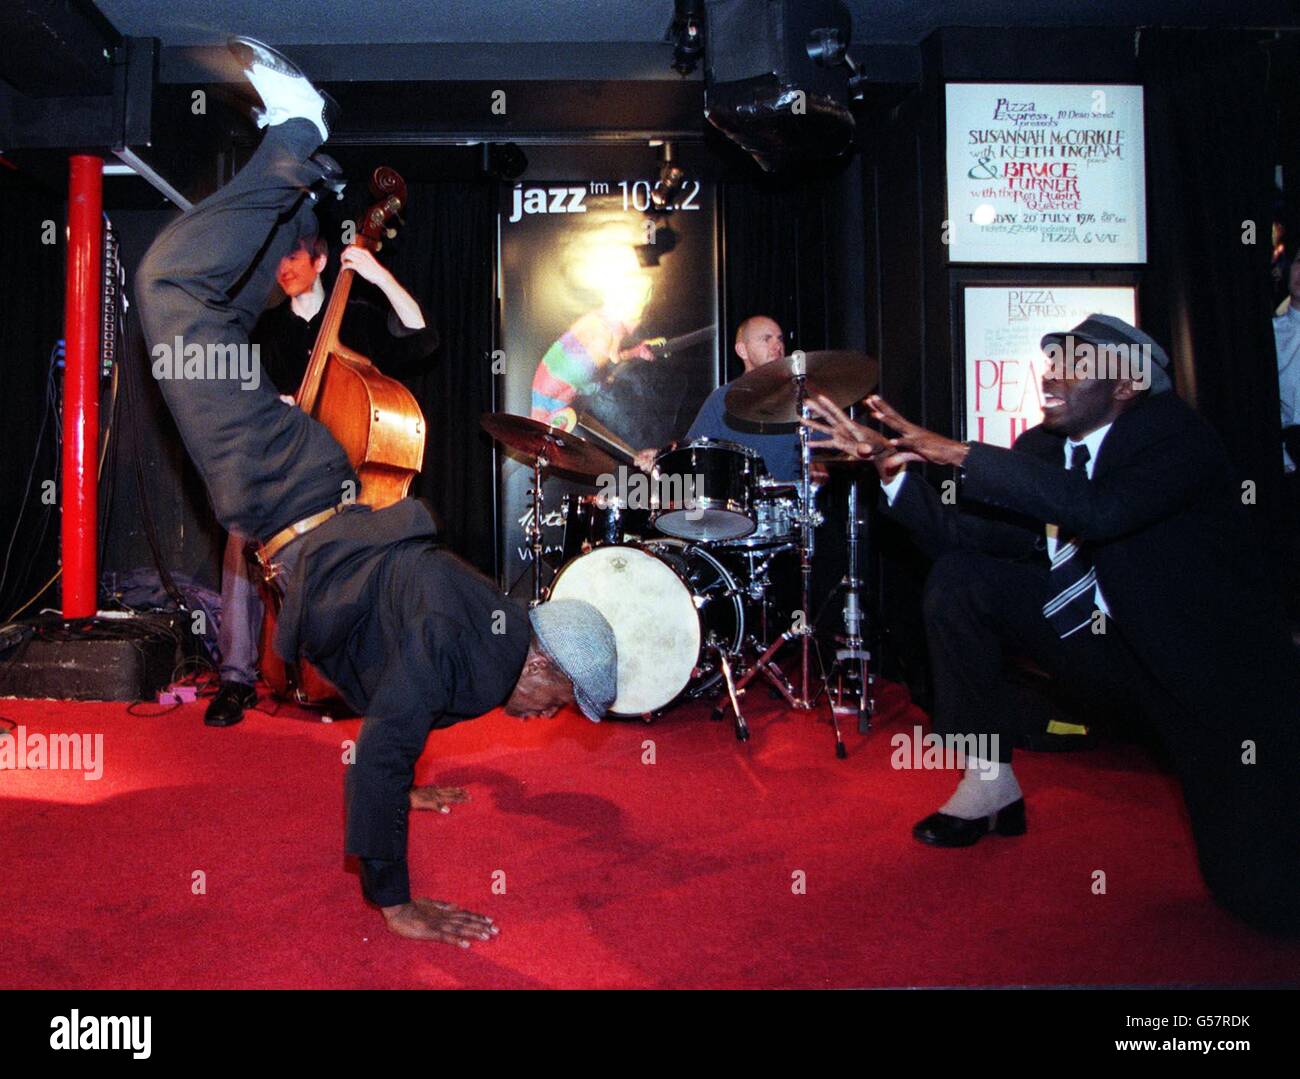 Dancer Kola (L) and Perry at the launch of JAZZWORKS at London's  PizzaExpress in Dean Street, central London. JAZZWORKS, organised by radio  station JAZZ FM, is a series of school workshops. *